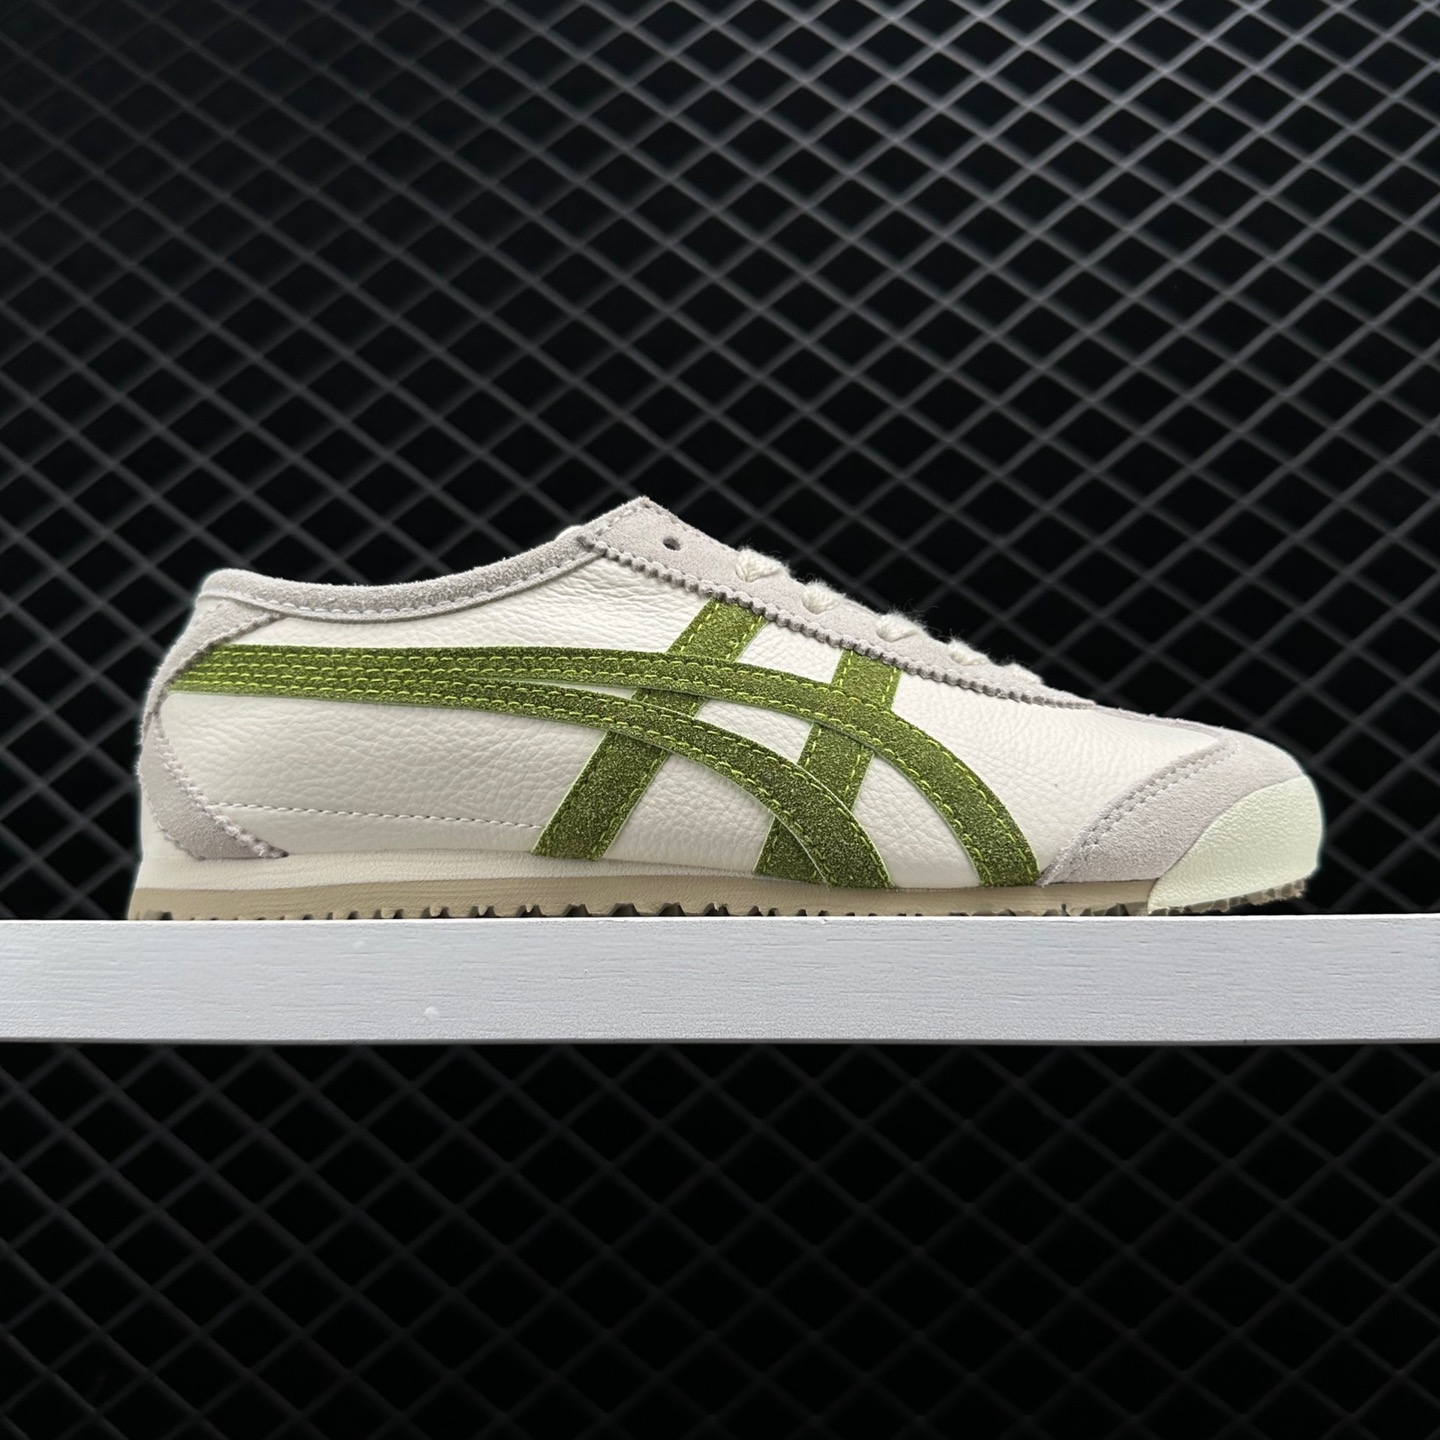 Onitsuka Mexico 66 Vin Birch Green - Stylish and Classic Sneakers